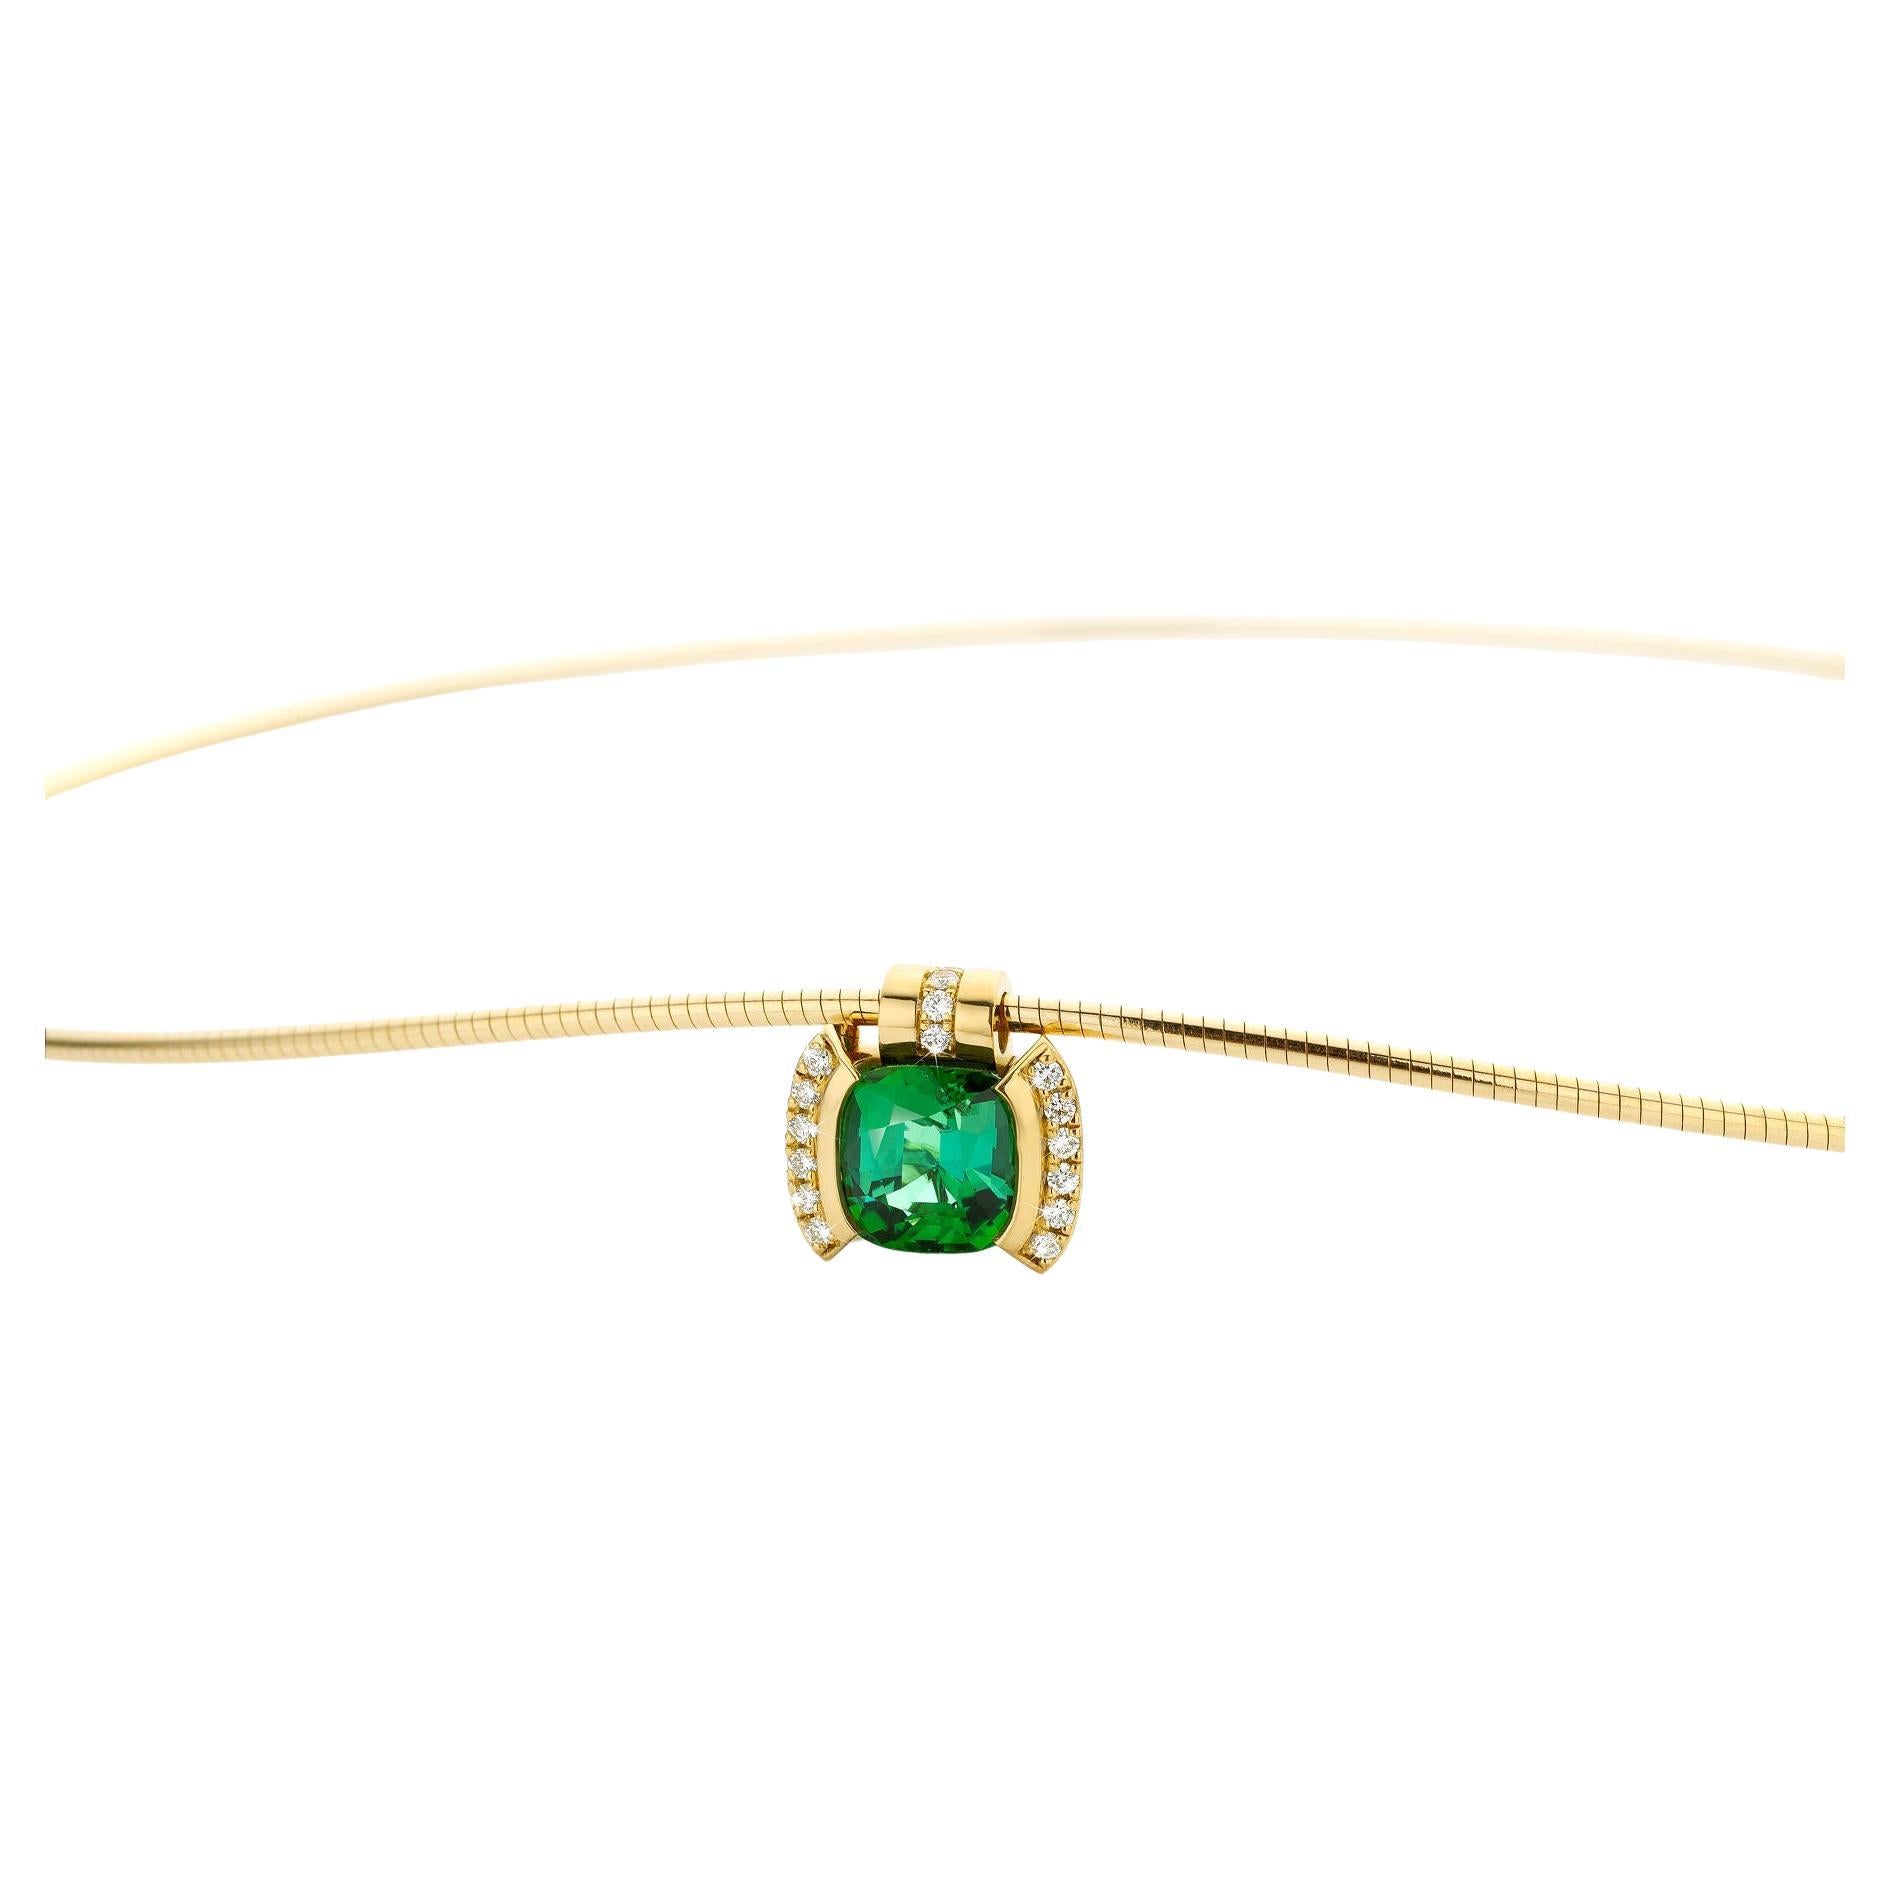 Cober Green Tourmaline with 16 Diamonds of 0.16 Carat total Yellow Gold Pendant For Sale